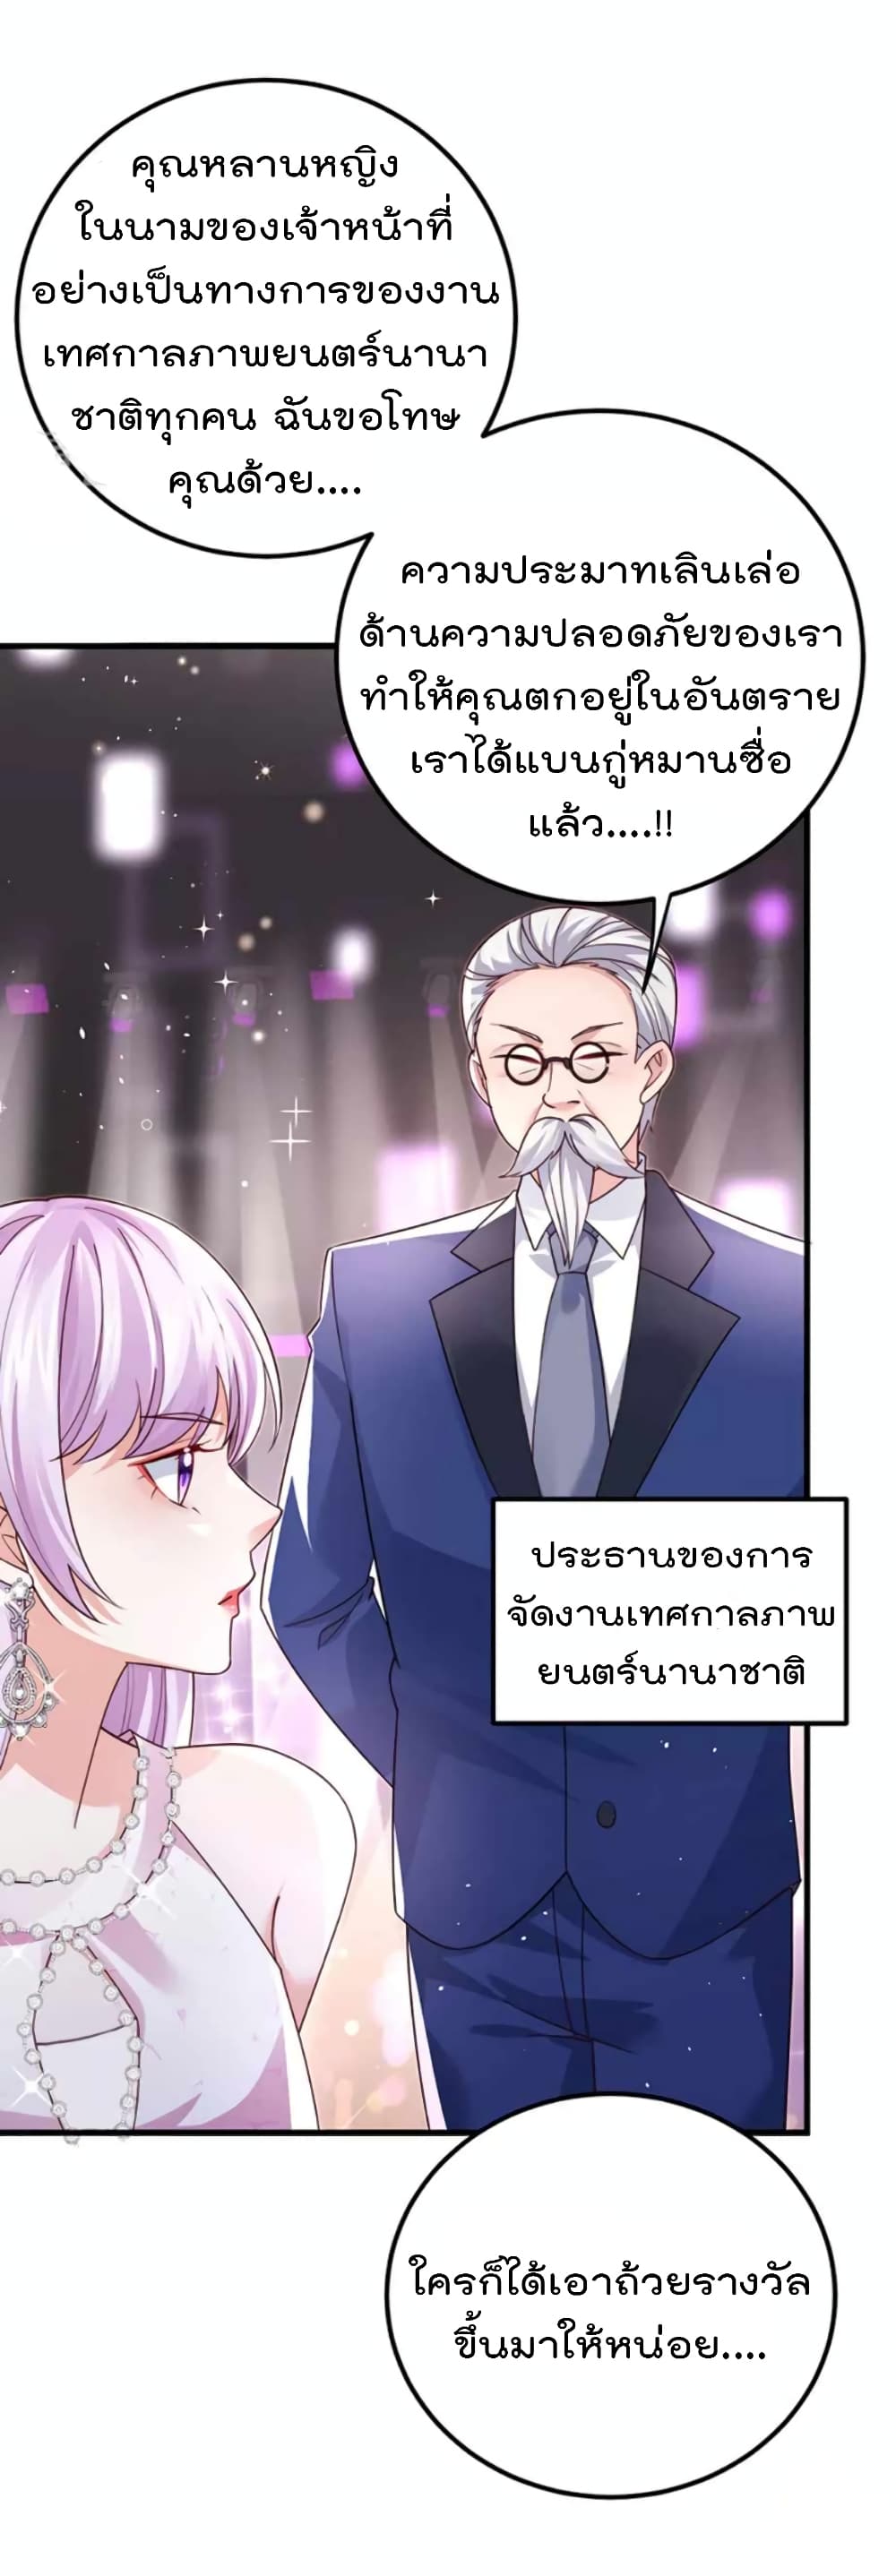 One Hundred Ways to Abuse Scum ตอนที่ 99 (11)